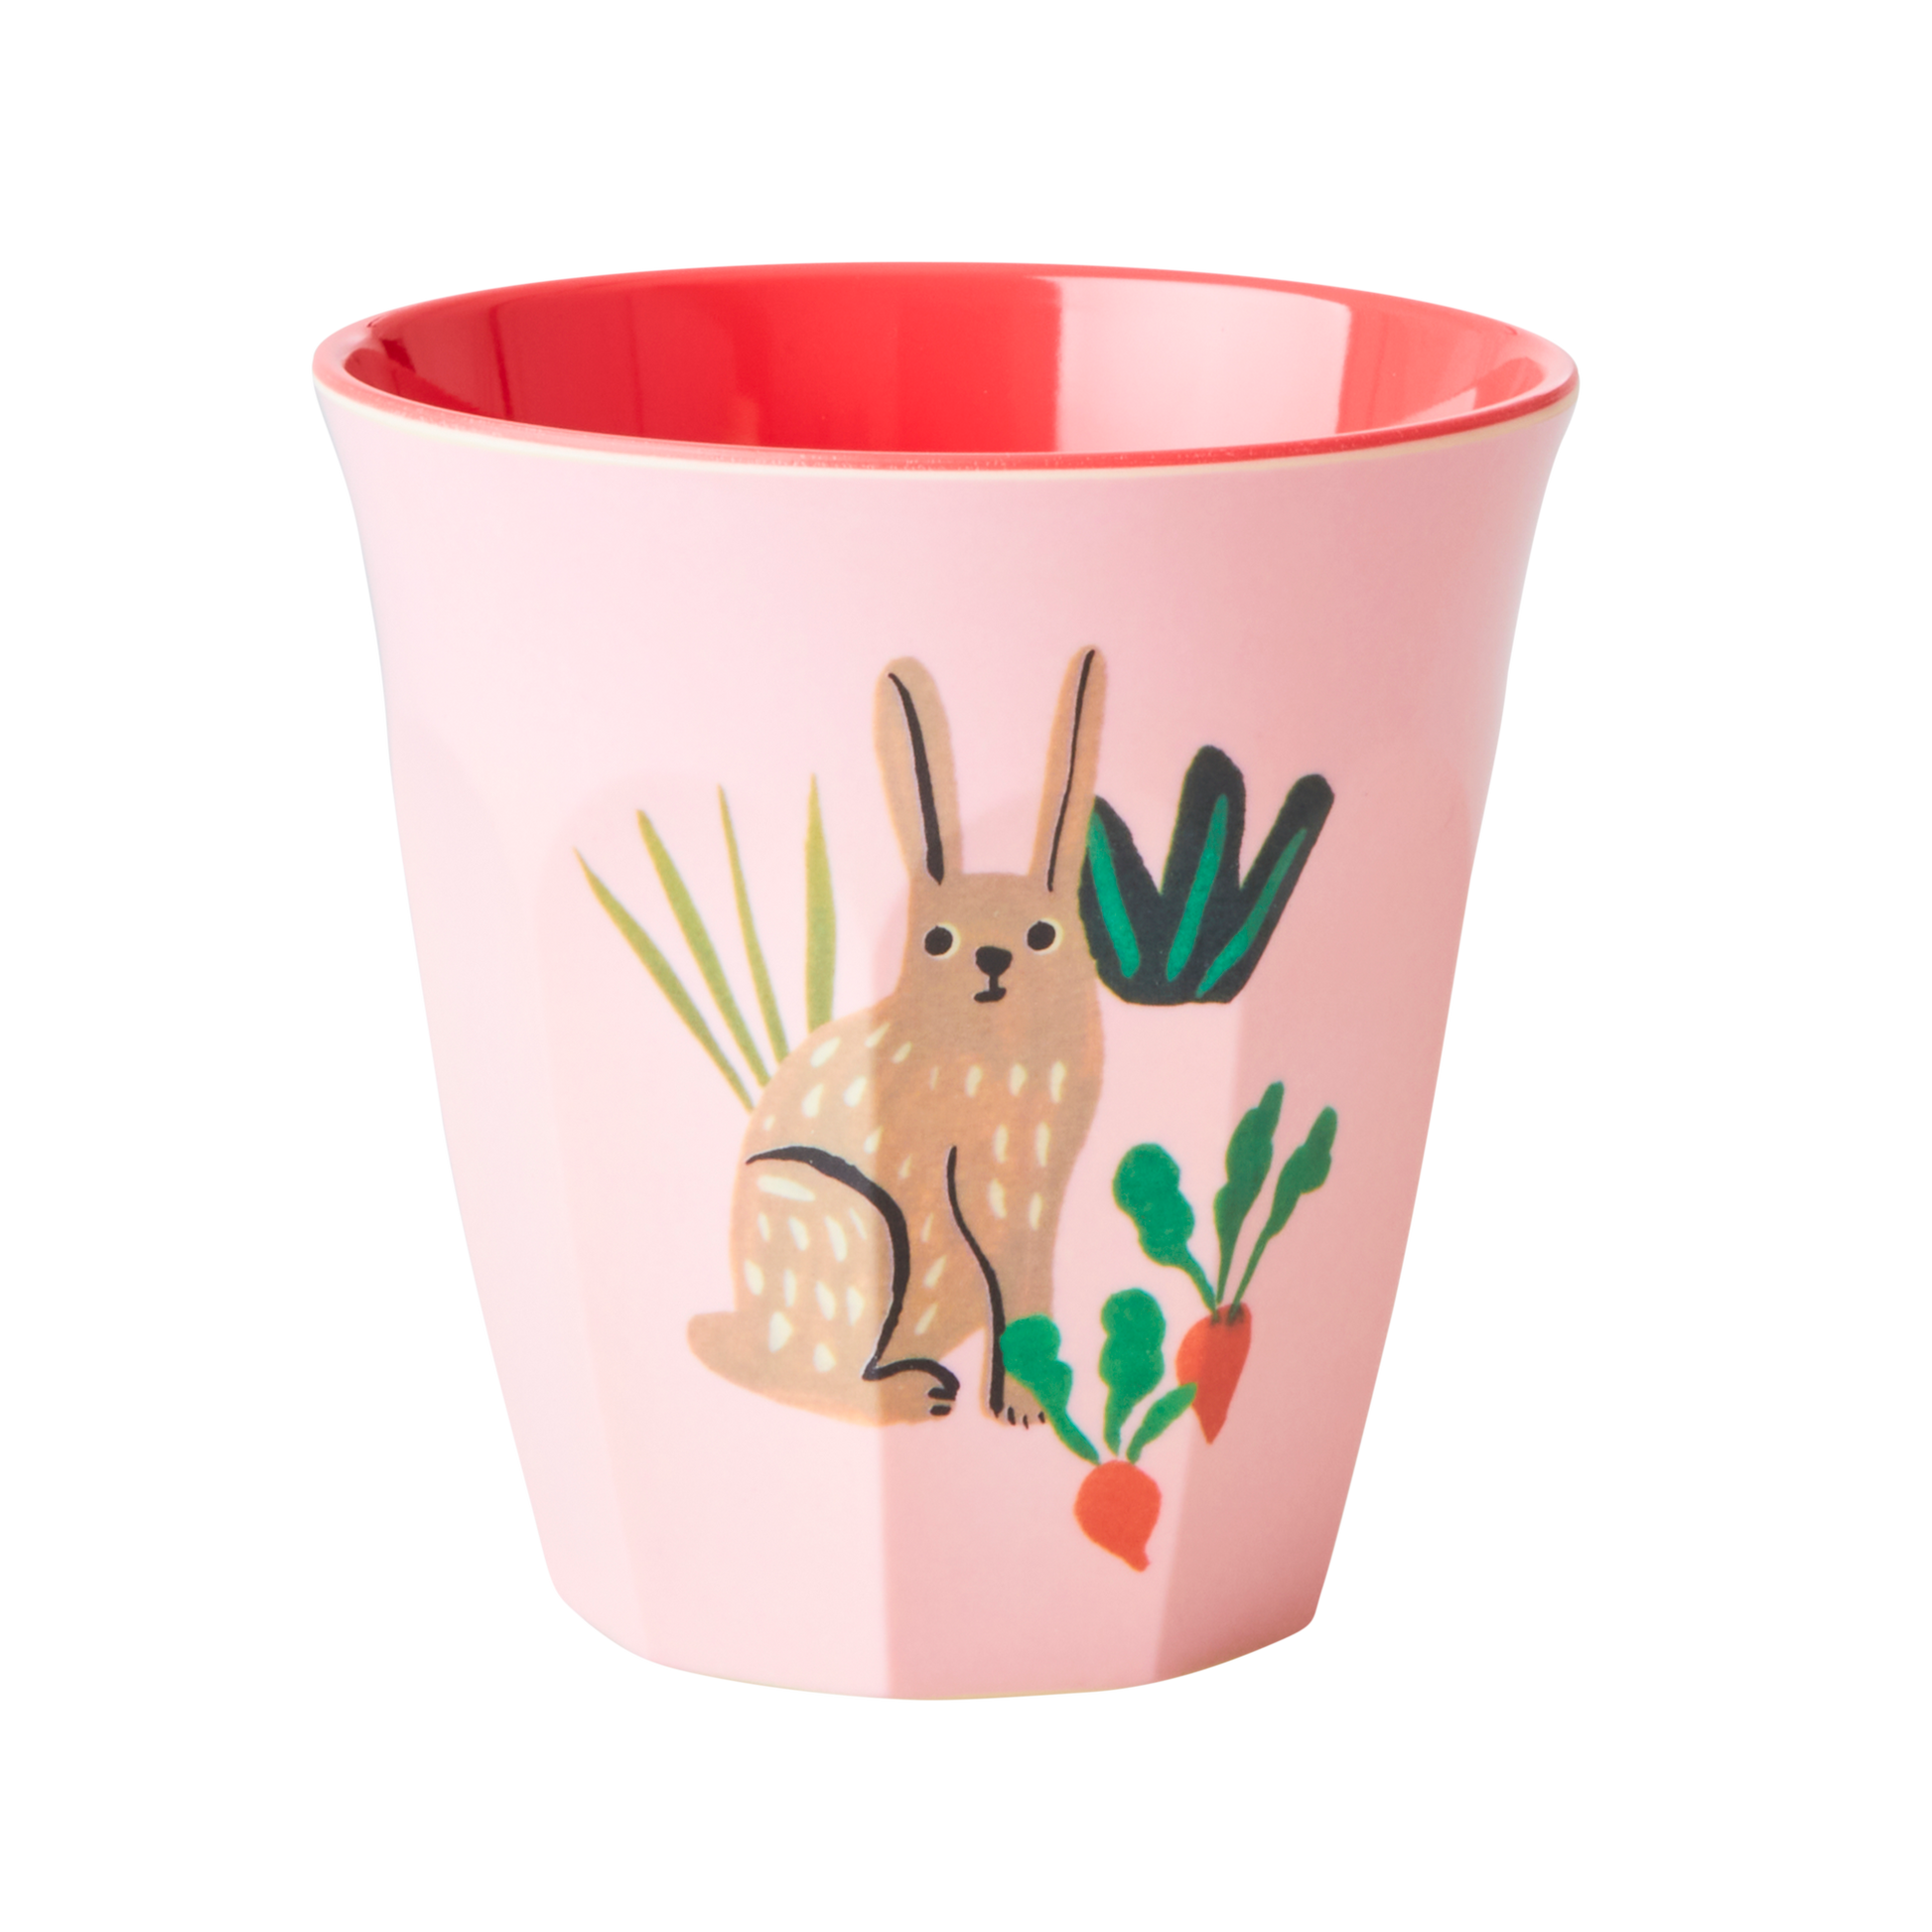 Melamine Kids Cups in Pink Farm Prints - Small - 6 pcs. in Gift Box - Rice By Rice